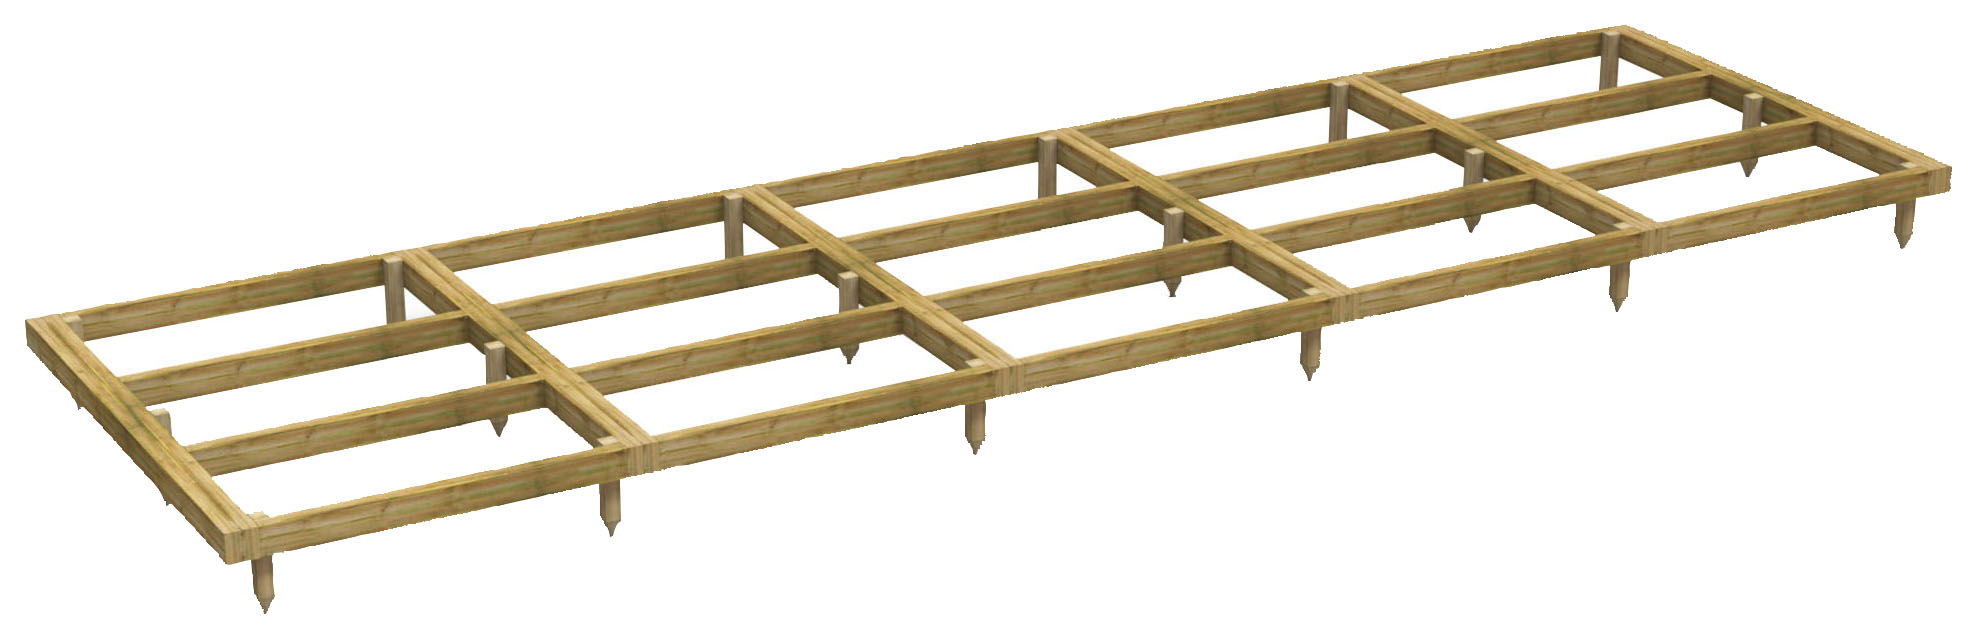 Power Sheds Pressure Treated Garden Building Base Kit - 20 x 6ft